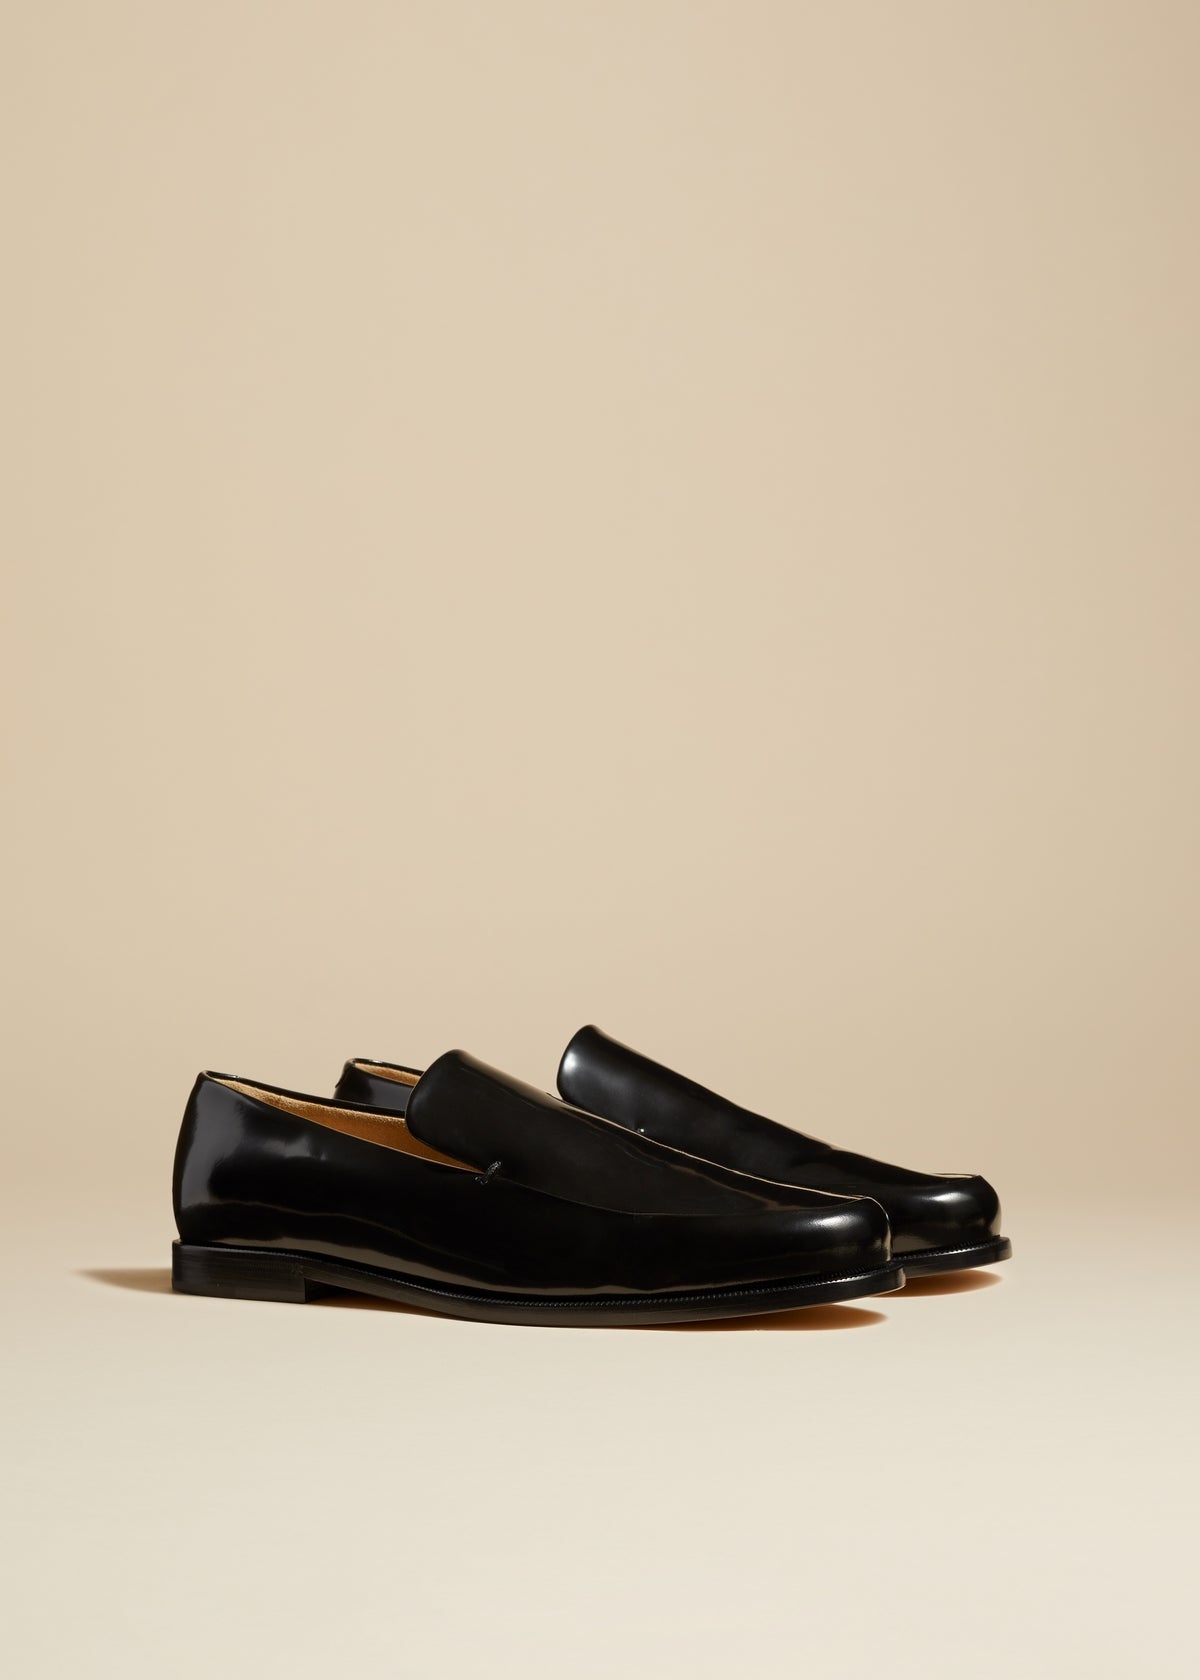 The Alessio Loafer in Black Leather - 2